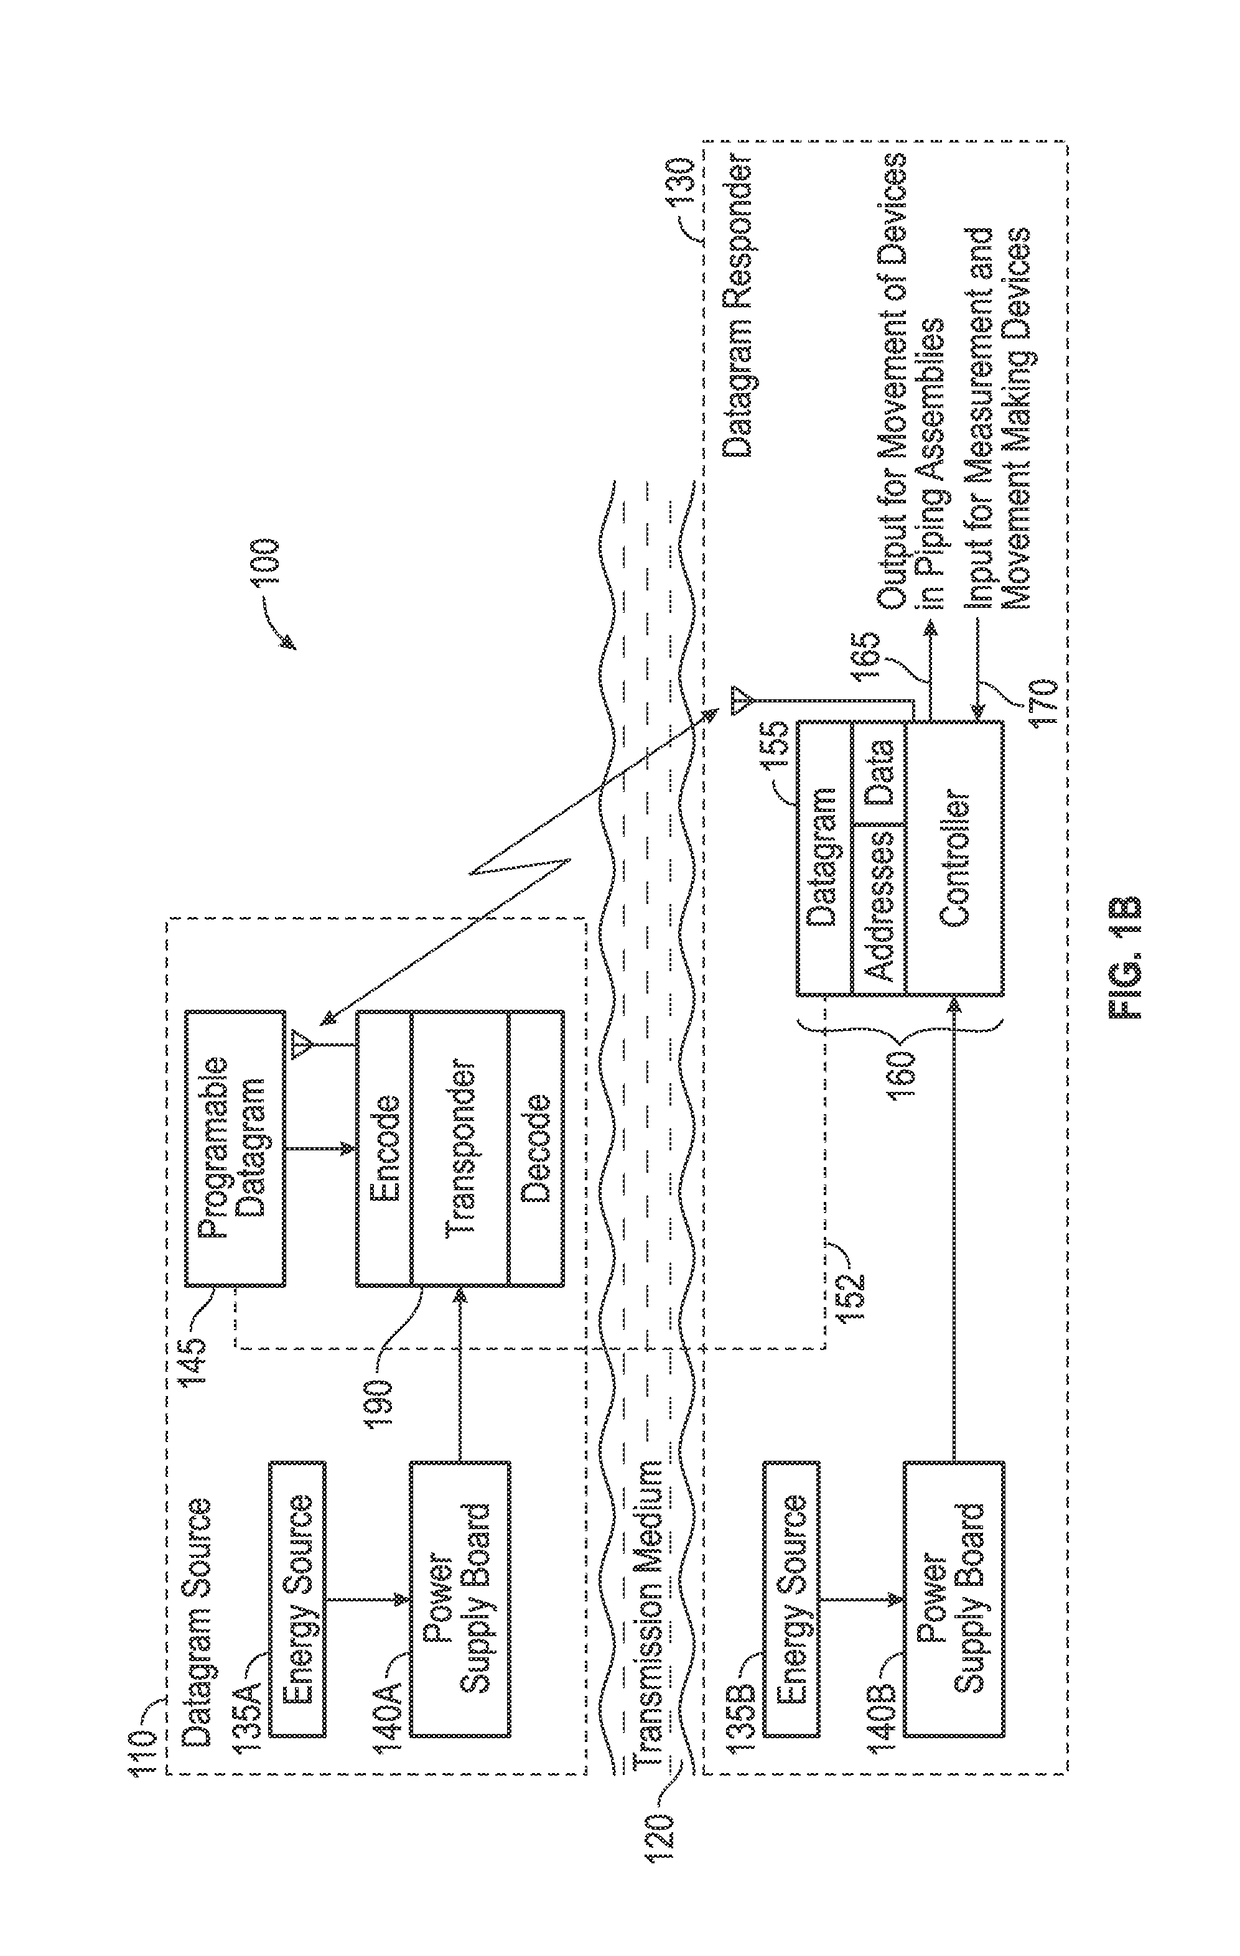 Piping assembly control system with addressed datagrams